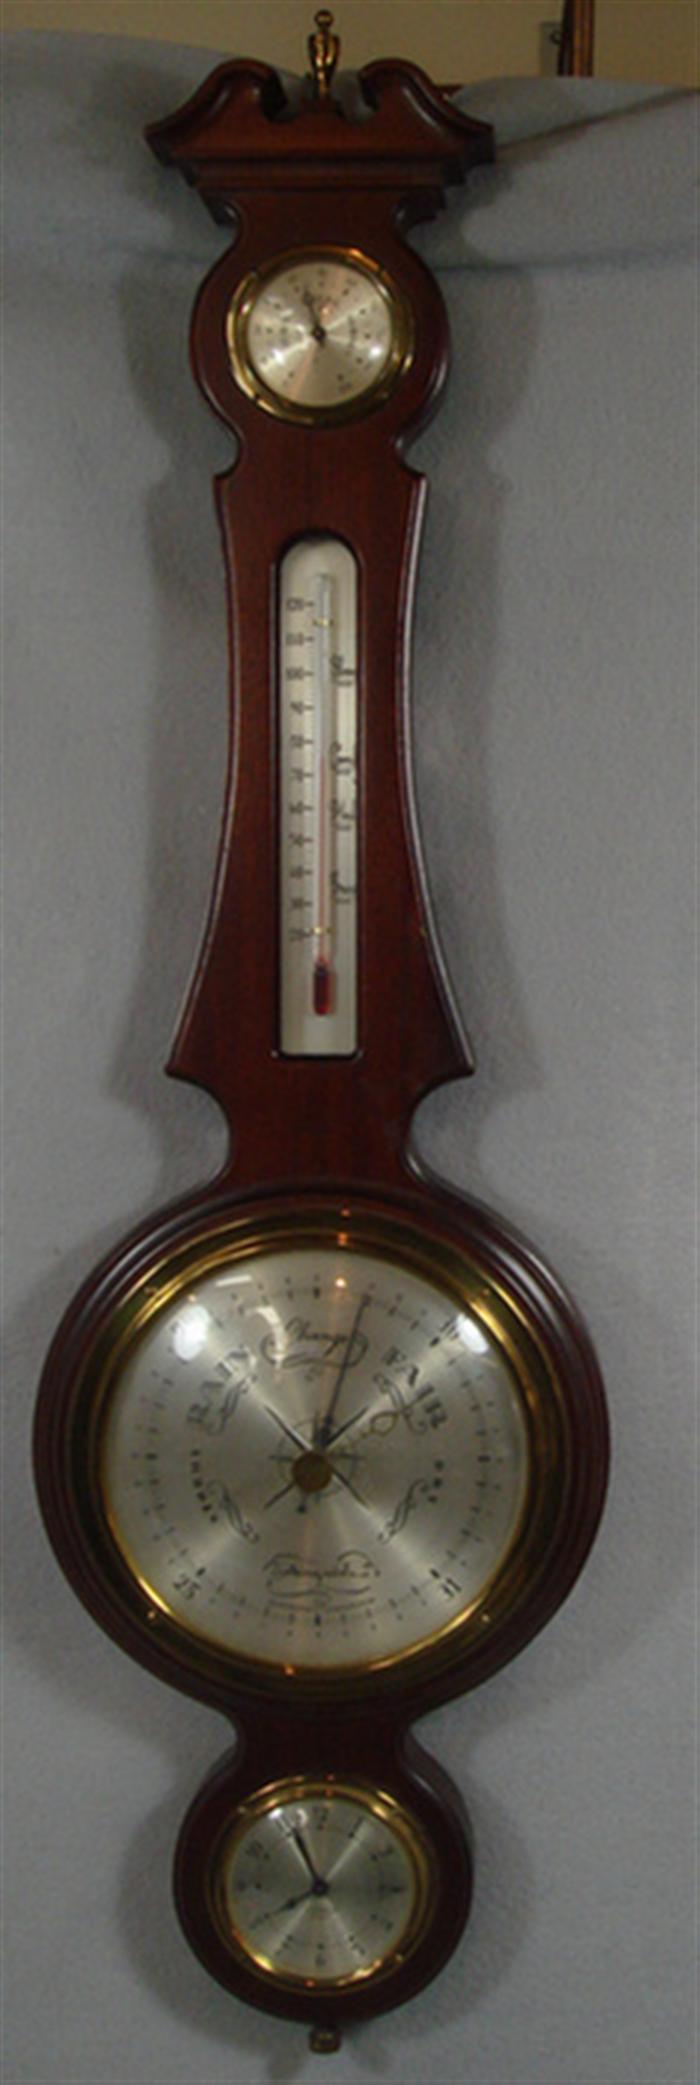 Airguide aneroid barometer with 3c008